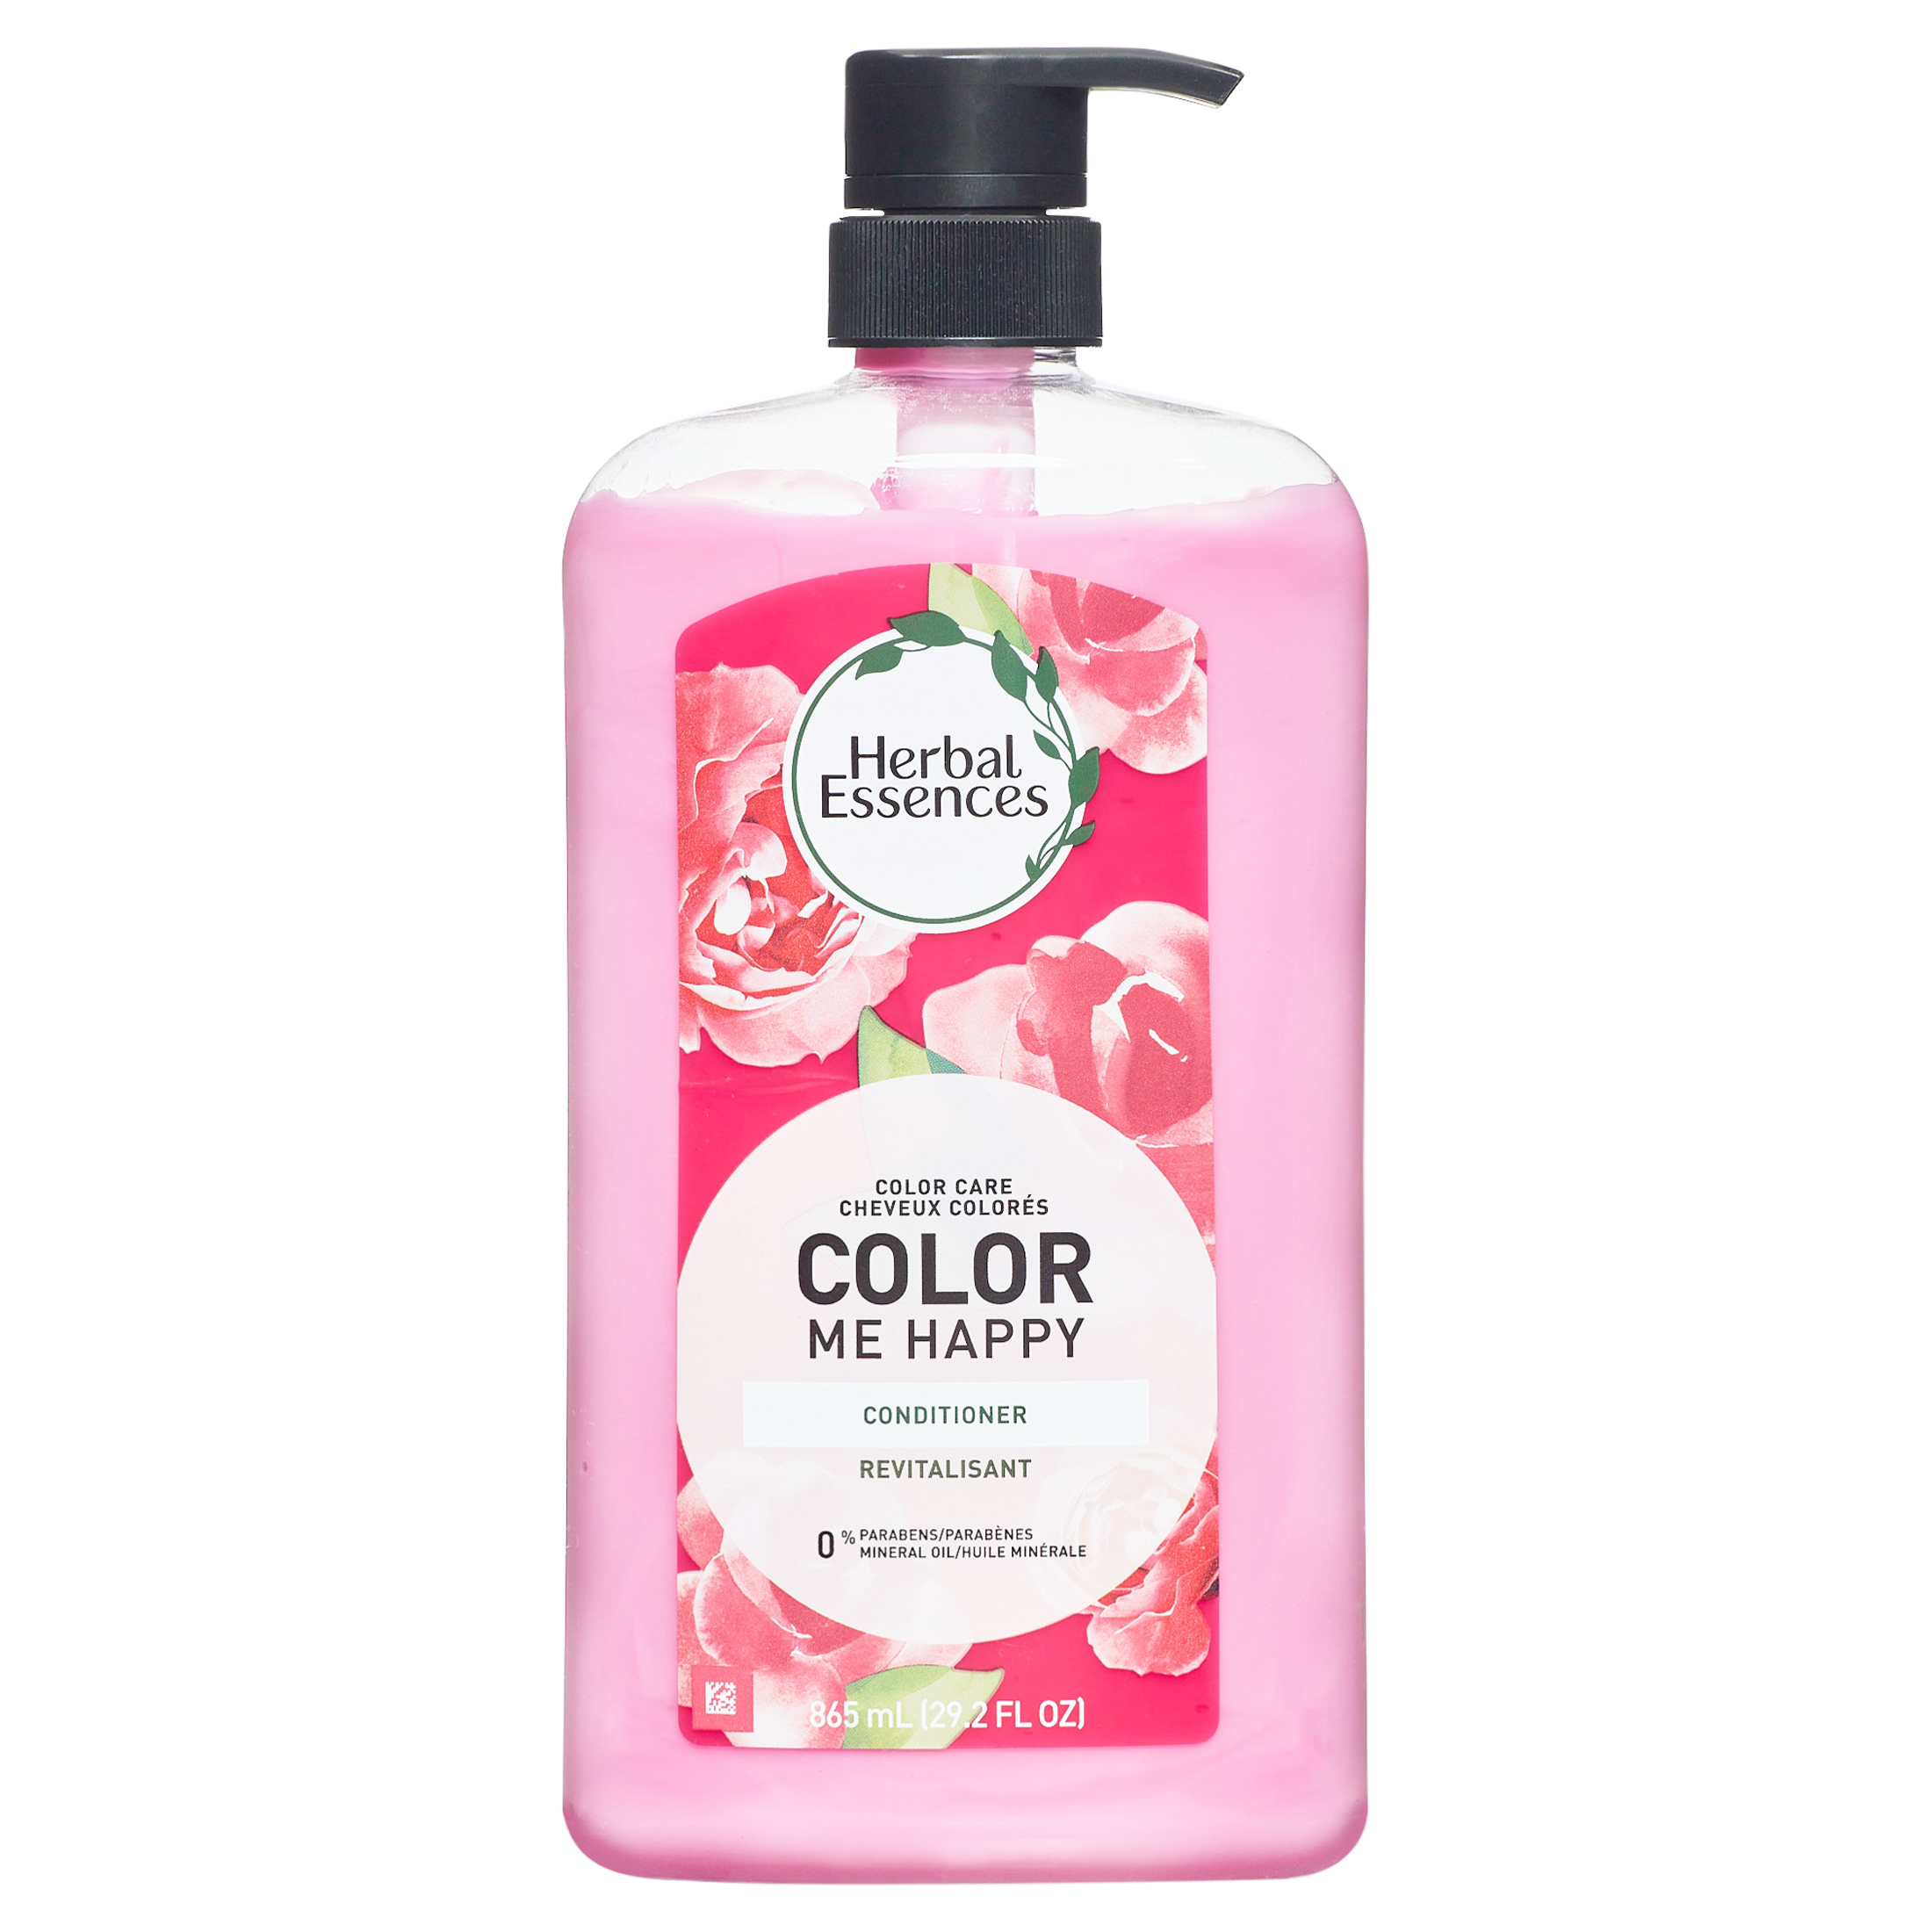 Herbal Essences Color Me Happy Conditioner for Color-Treated Hair, 29.2 fl oz - image 1 of 7